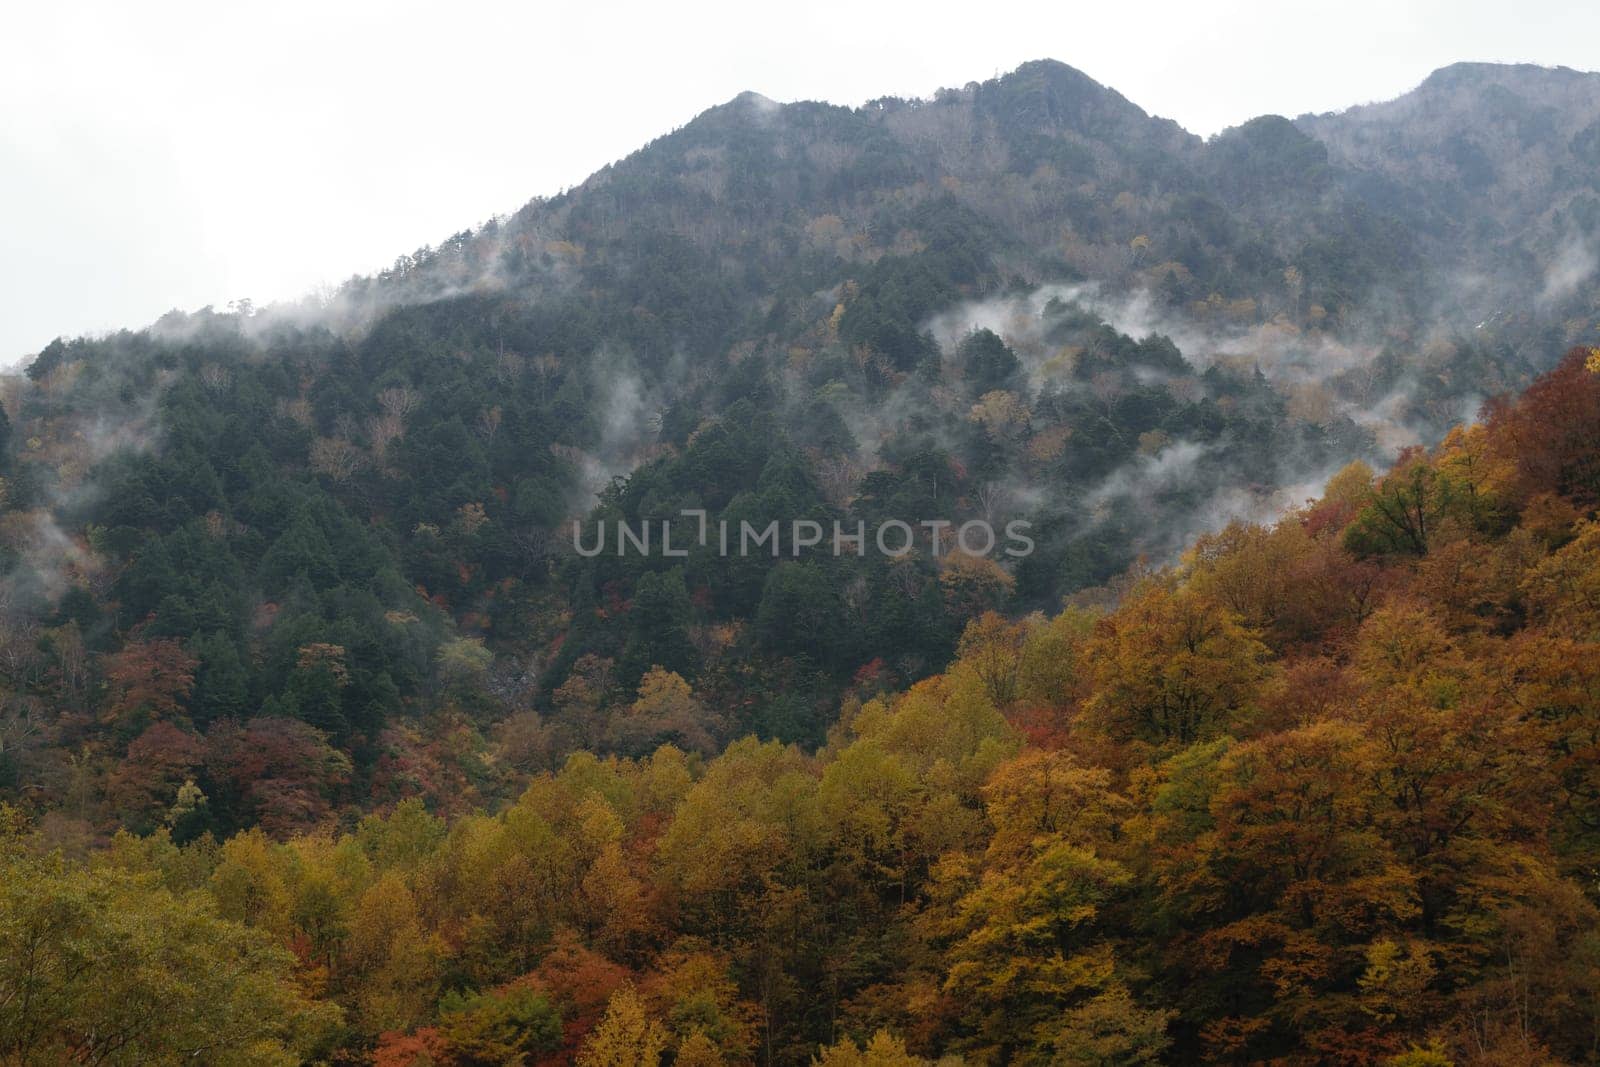 A scenic view of a forested mountain with autumn foliage and mist rising from the trees.